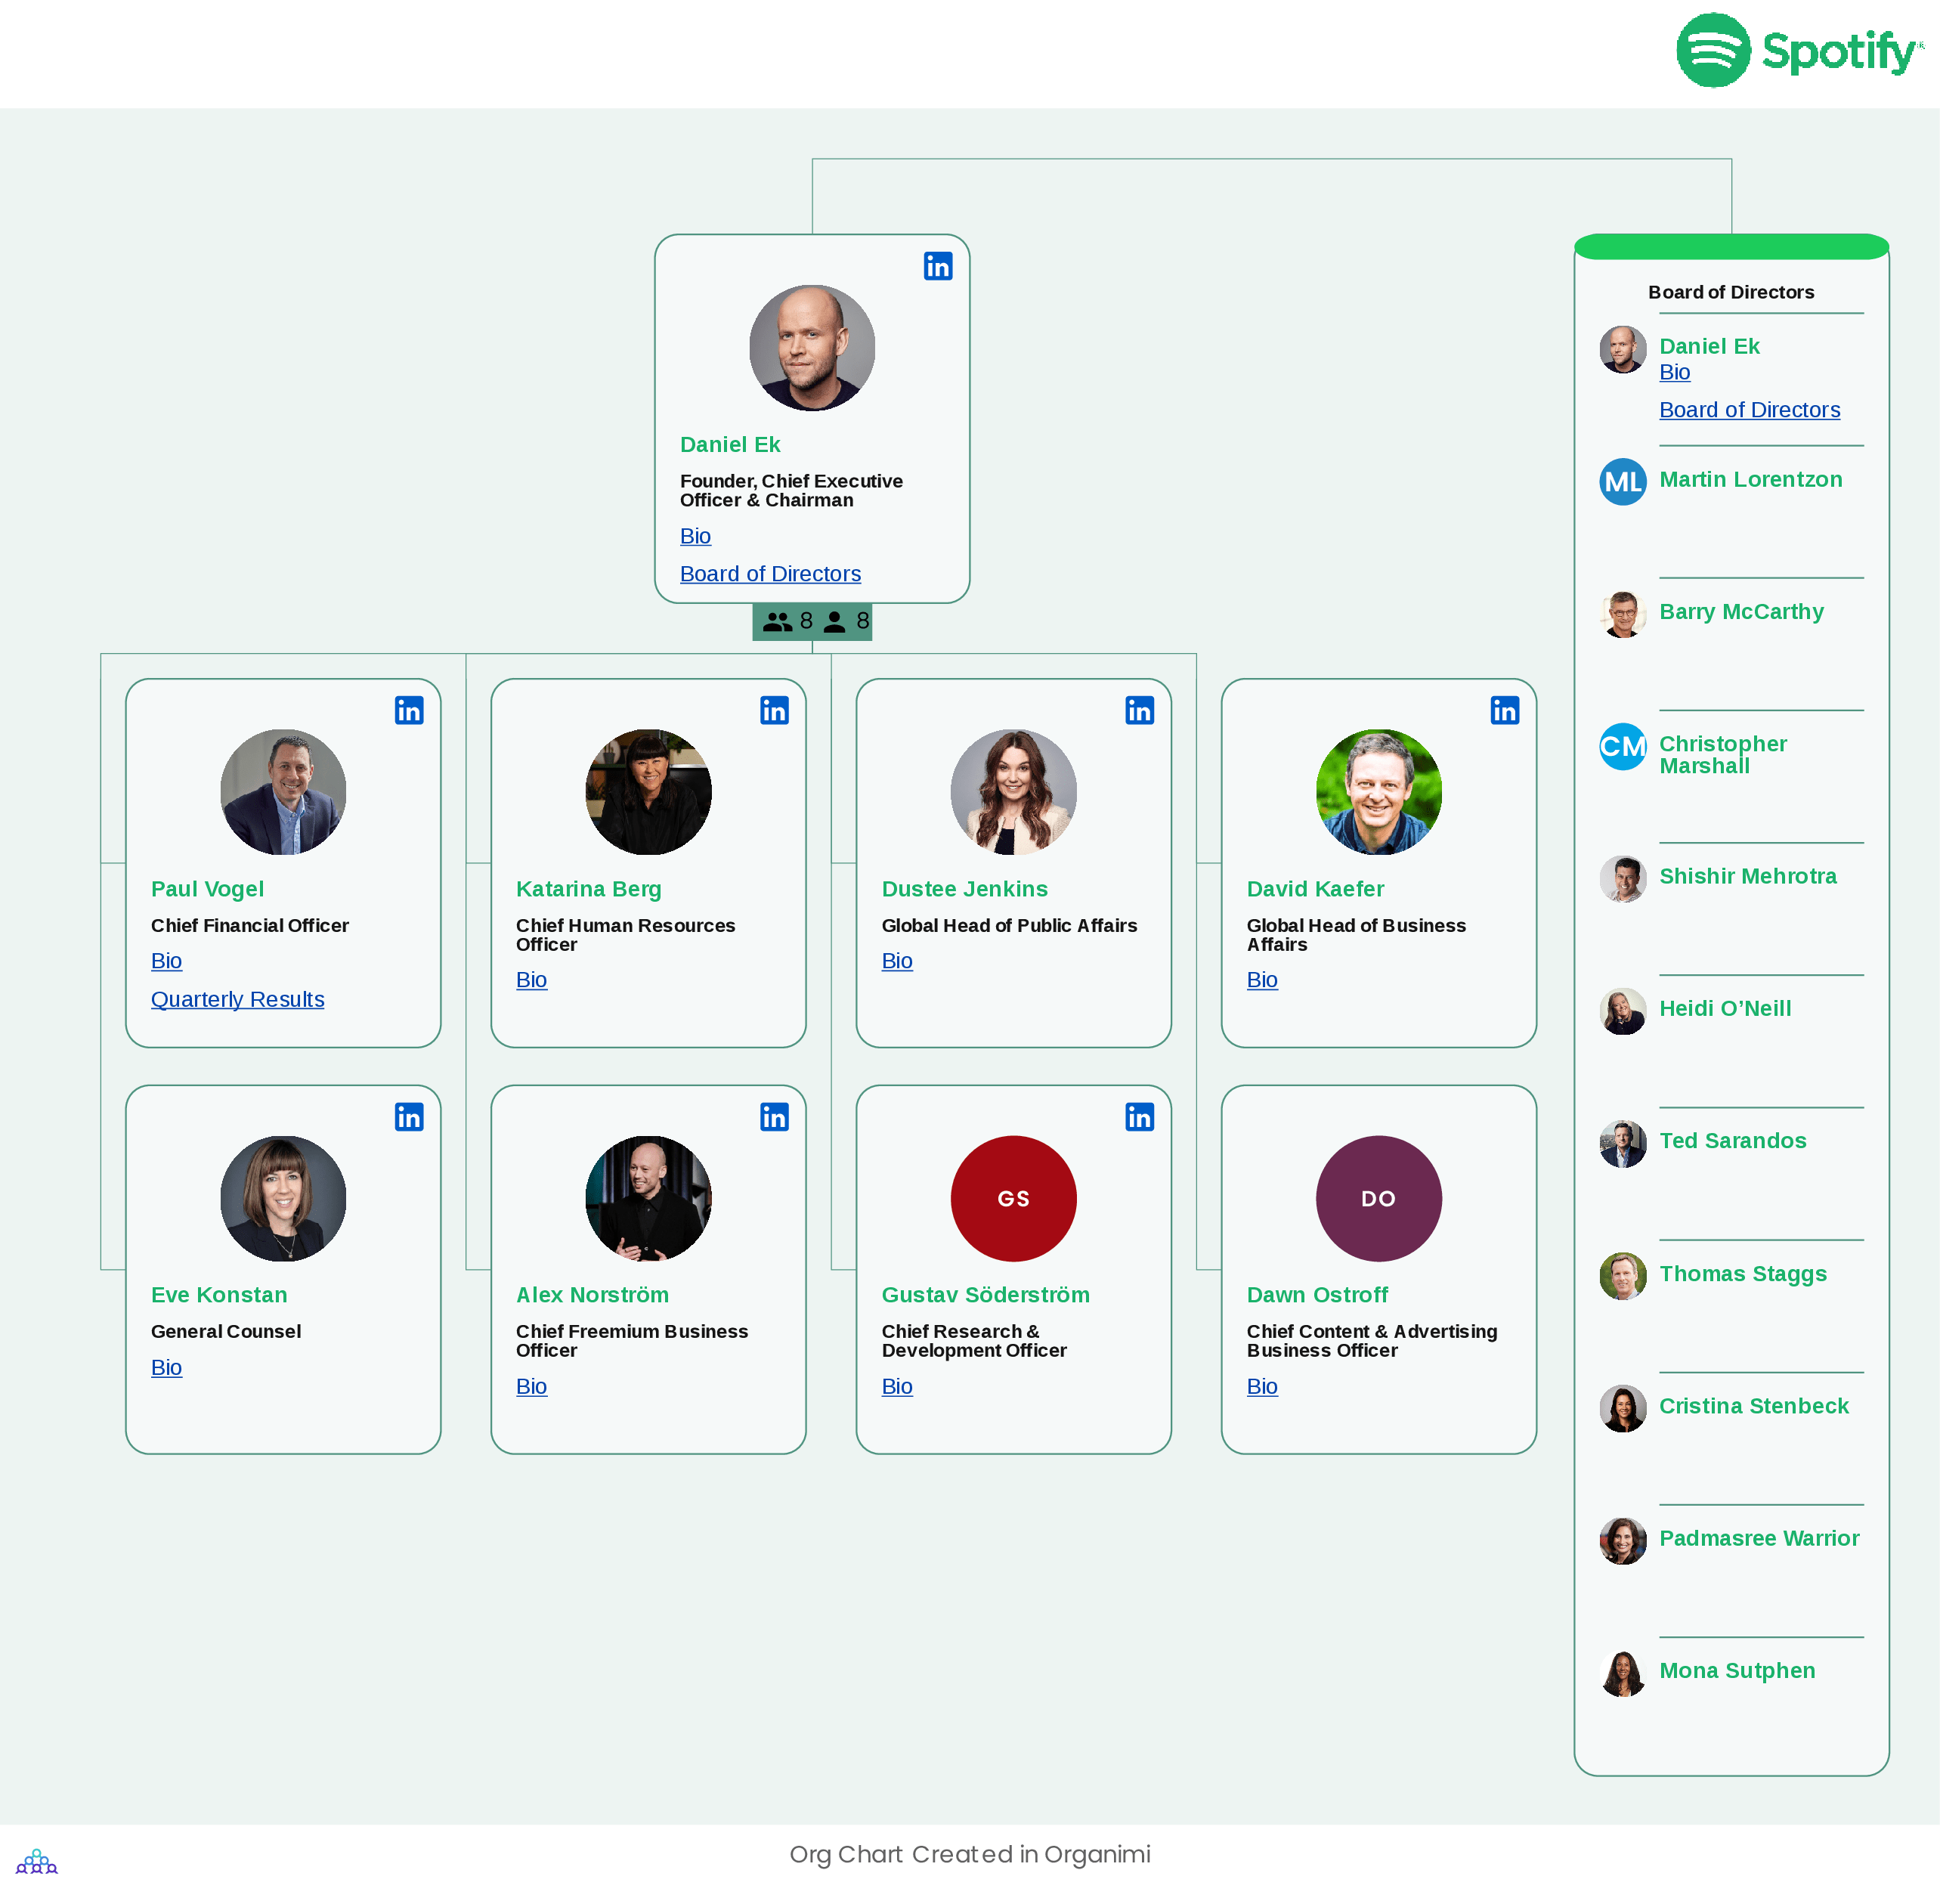 Spotify's Organizational Structure Org Chart